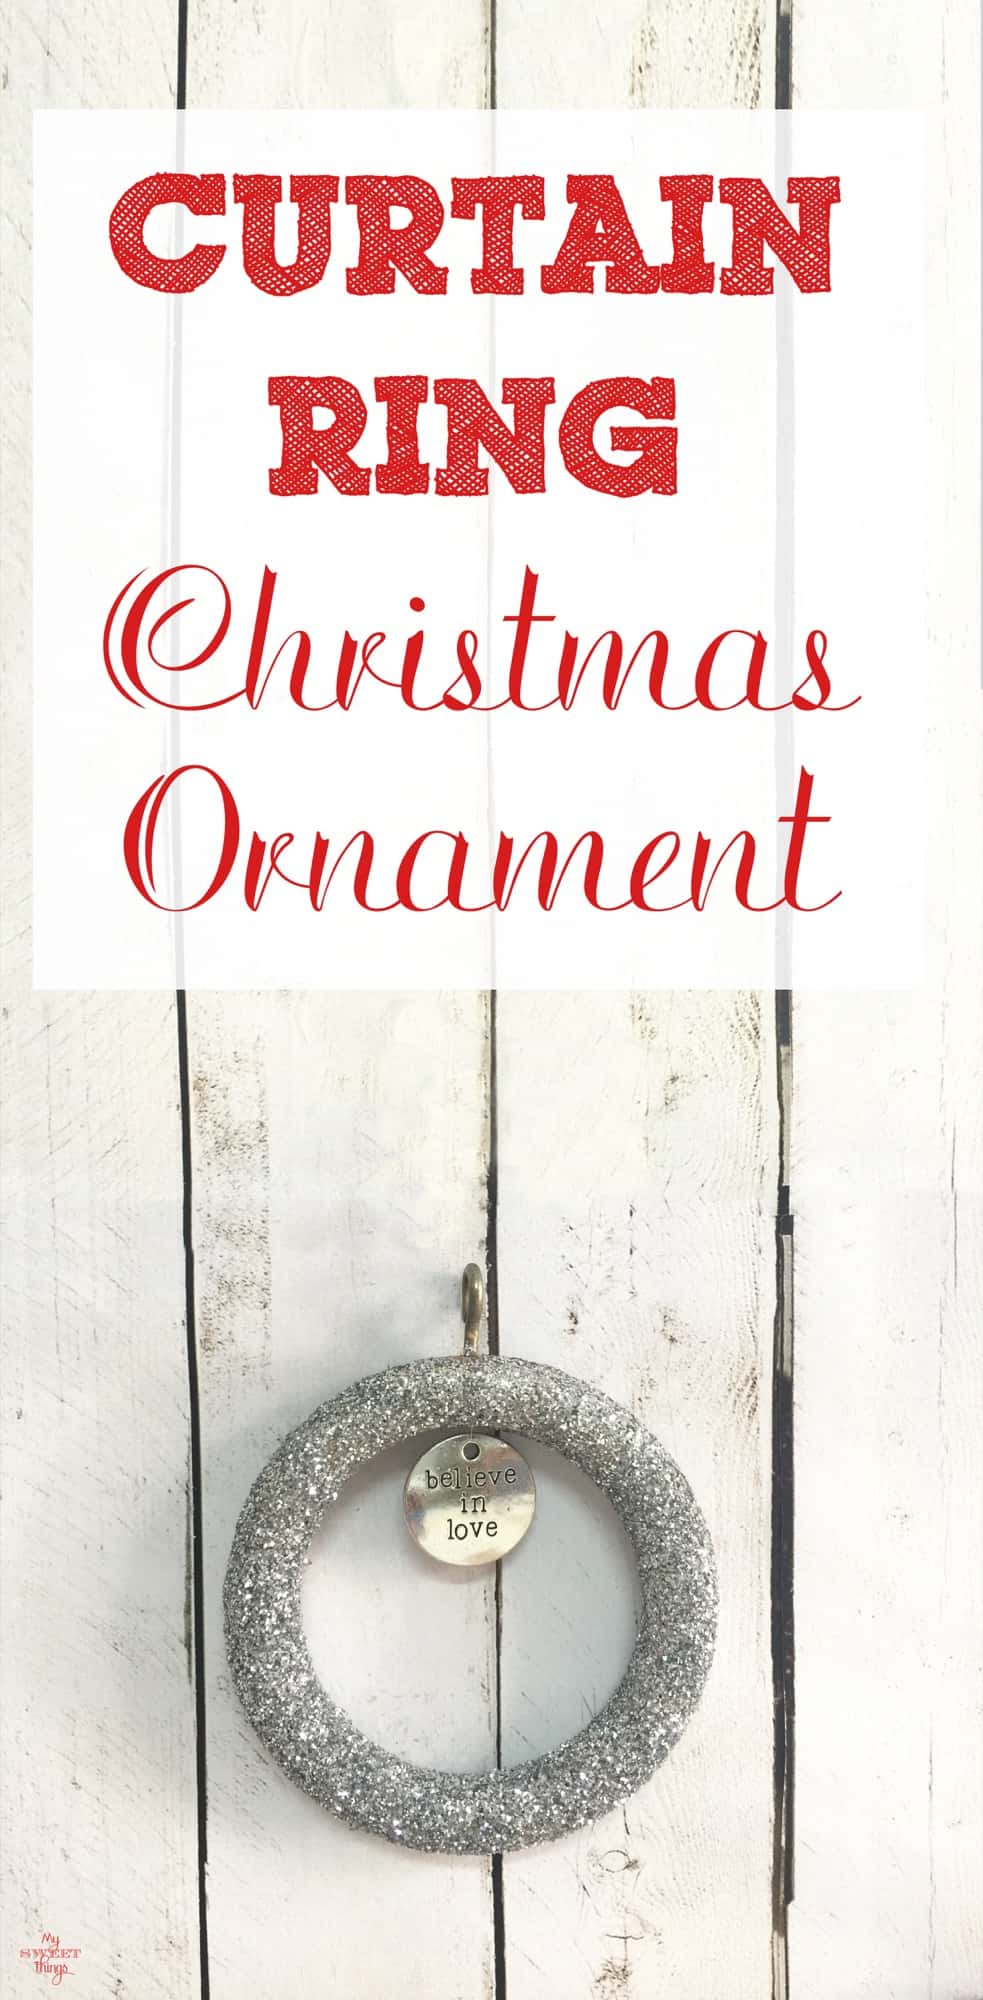 How to make a curtain ring Christmas ornament with glitter · Via www.sweethings.net